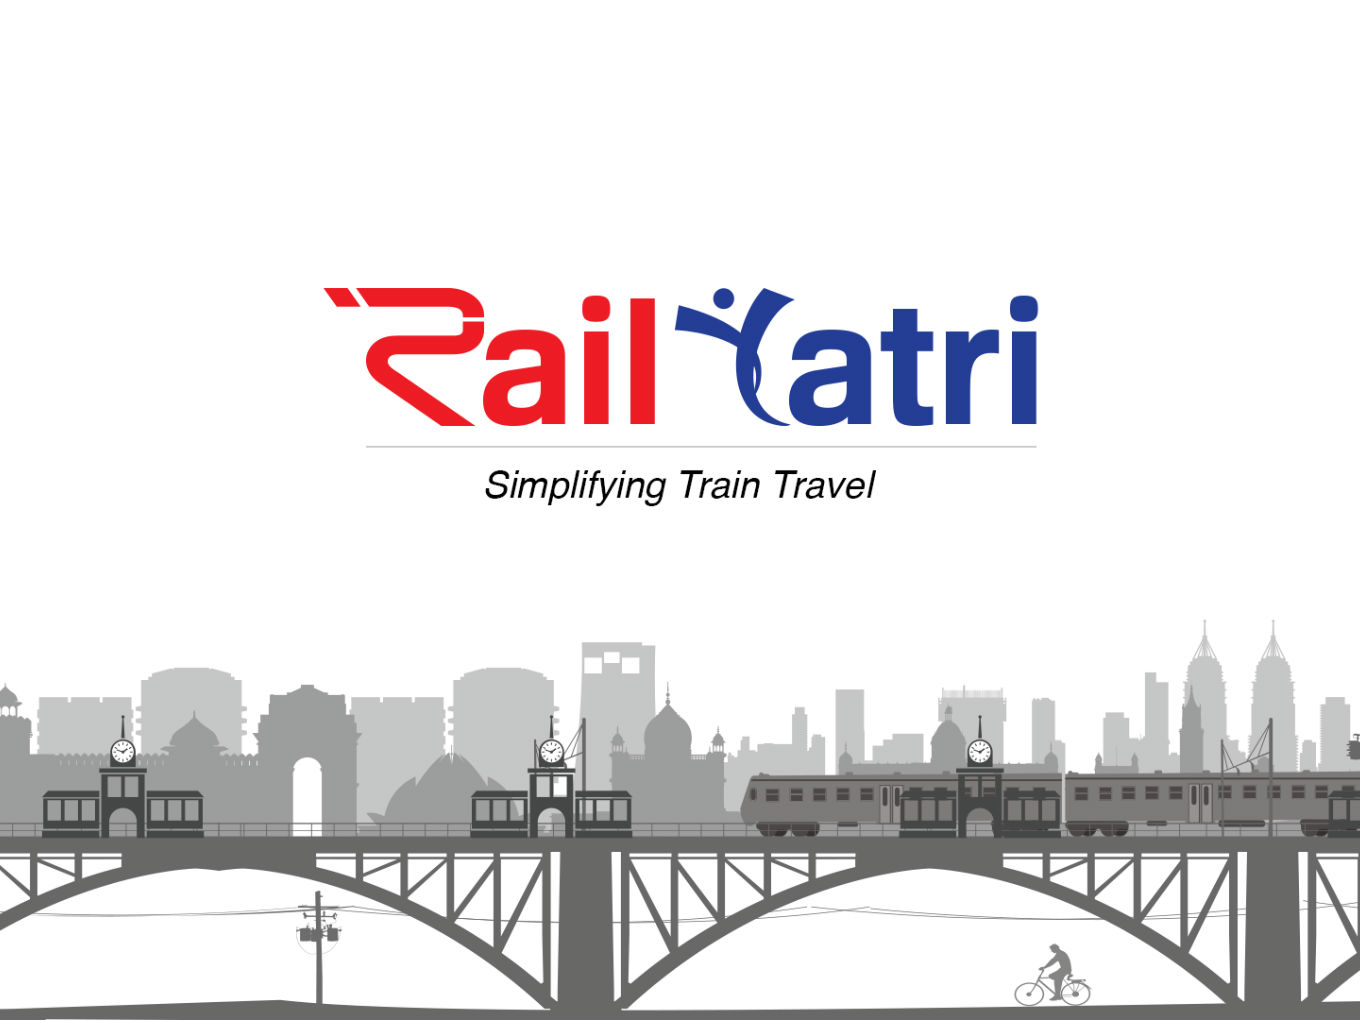 Delhi High Court Rules RailYatri Operations As Unauthorised After IRCTC Complaint